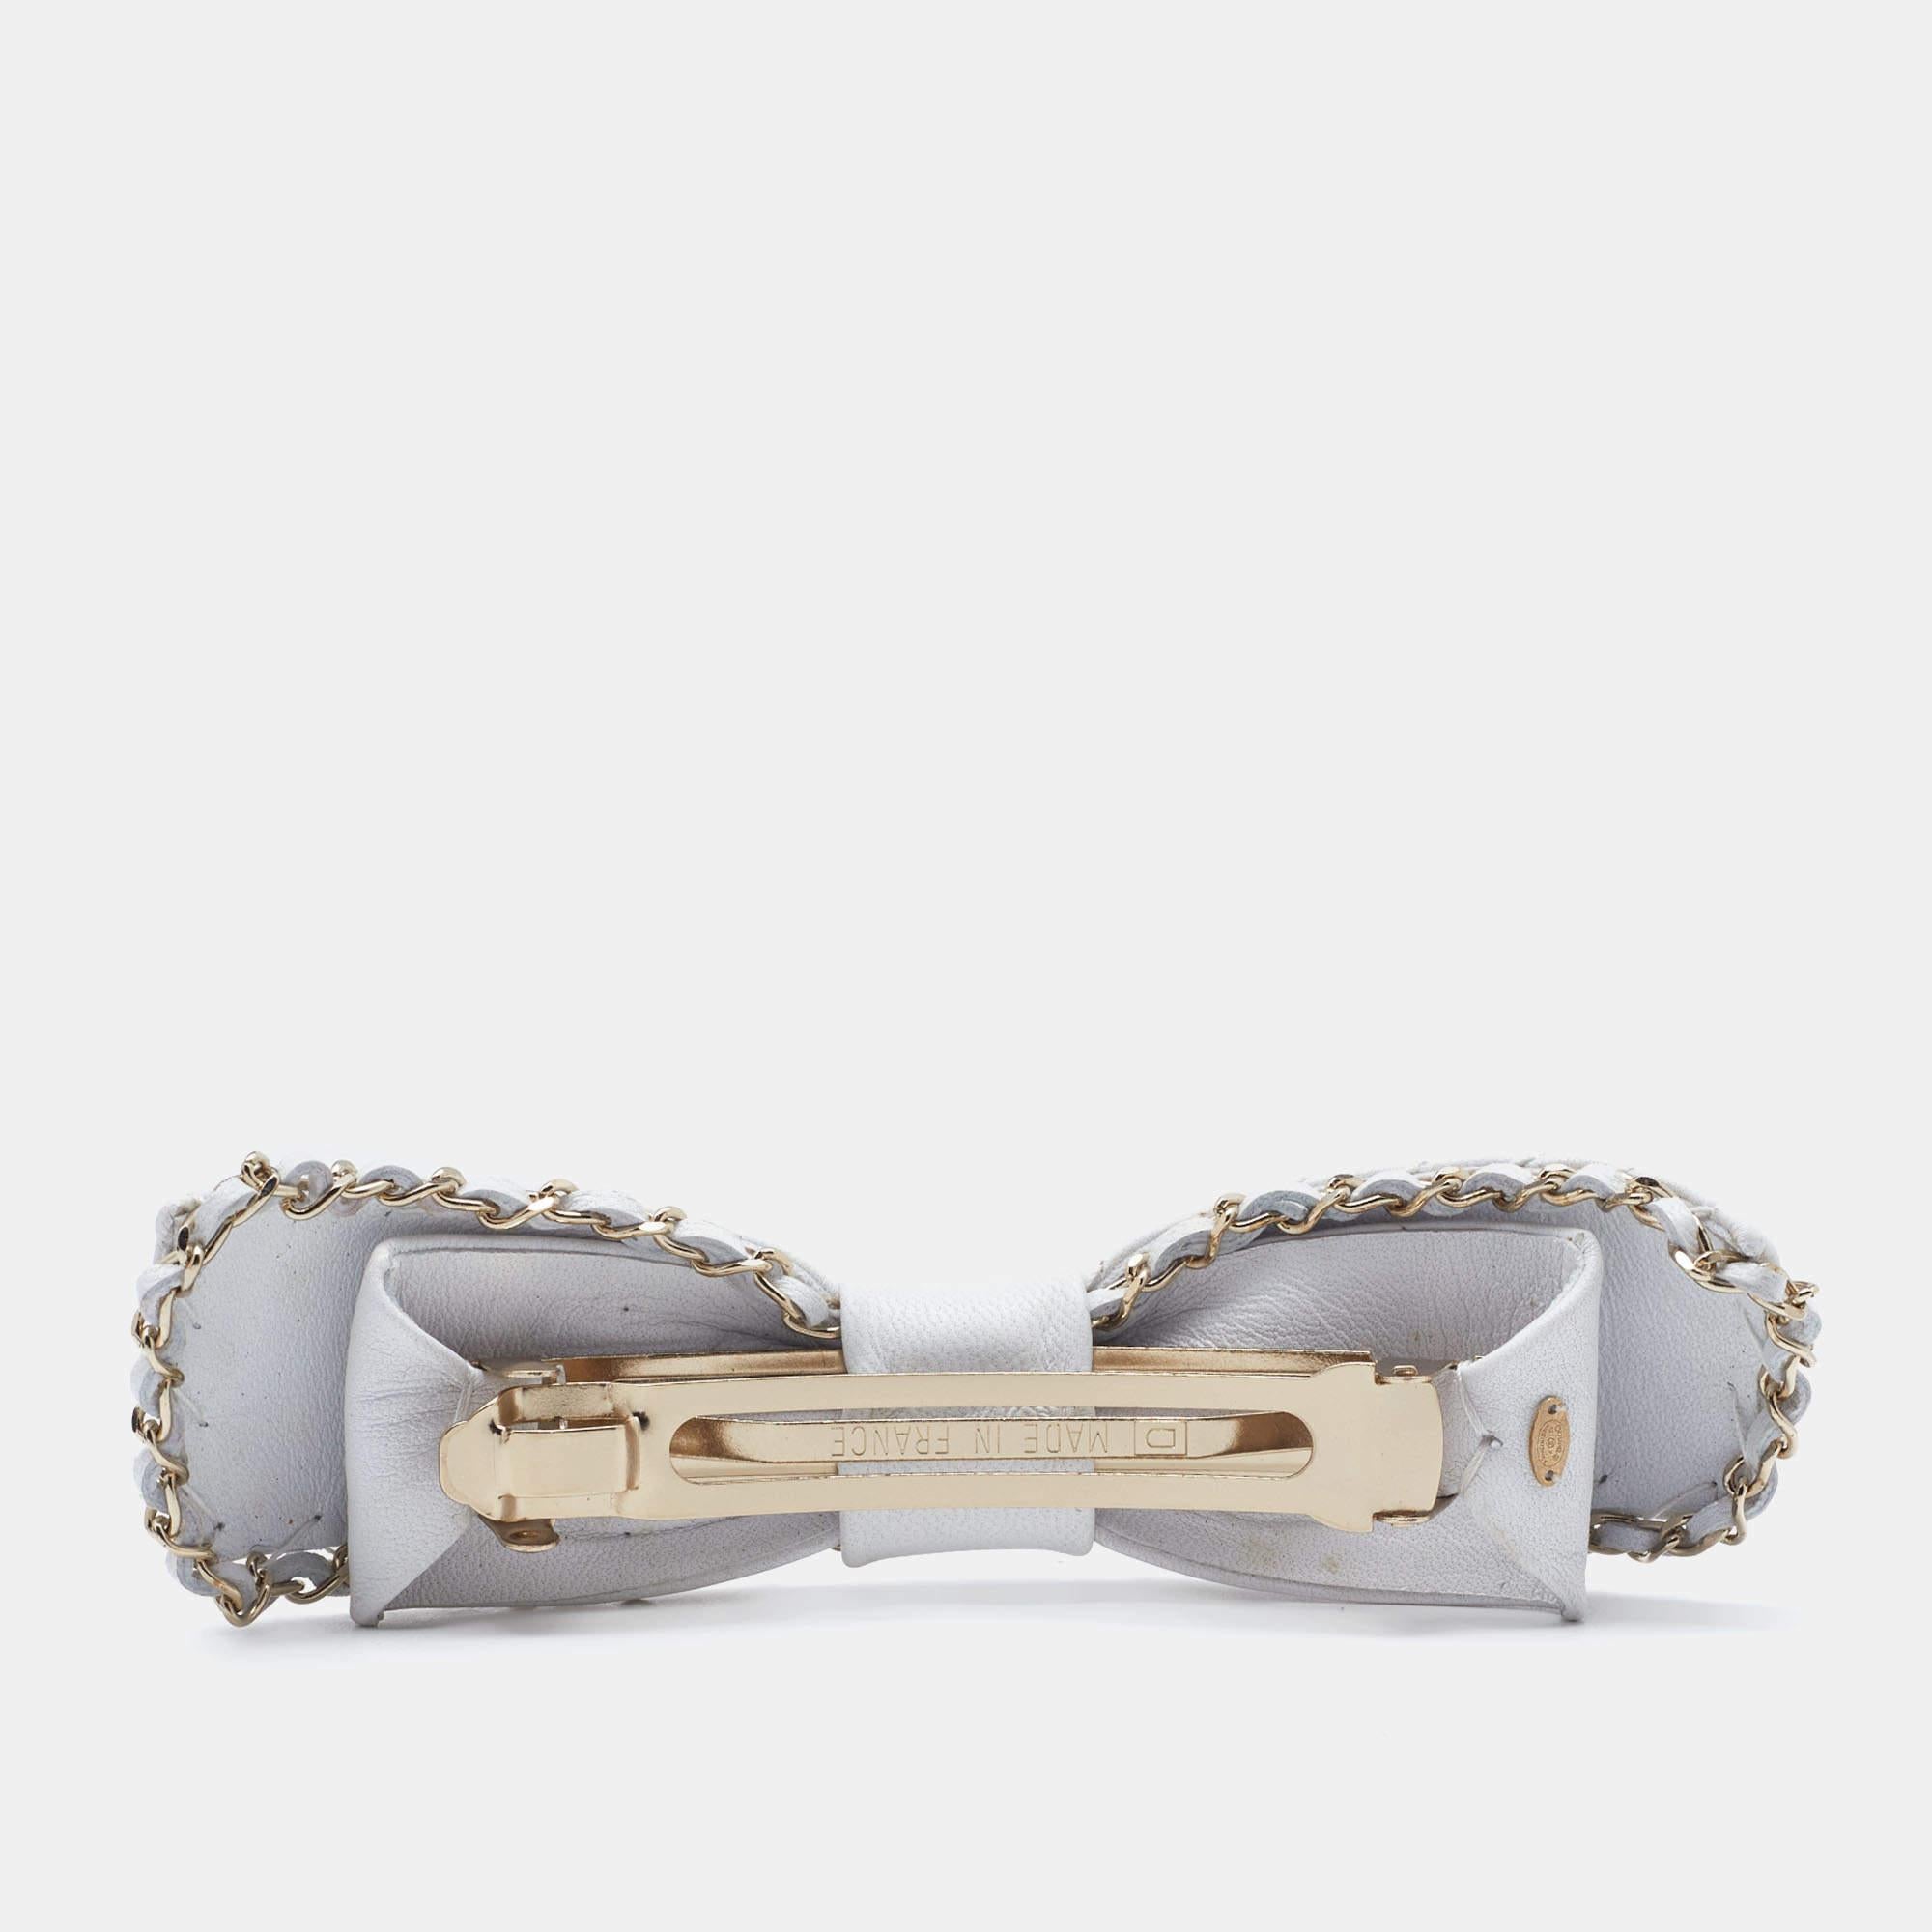 How sweet and pretty is this barrette from Chanel! It has been beautifully made in leather and gold-tone metal as a bow with the CC logo sitting on the front. You can clip it to your hair using the clasp at the back.

